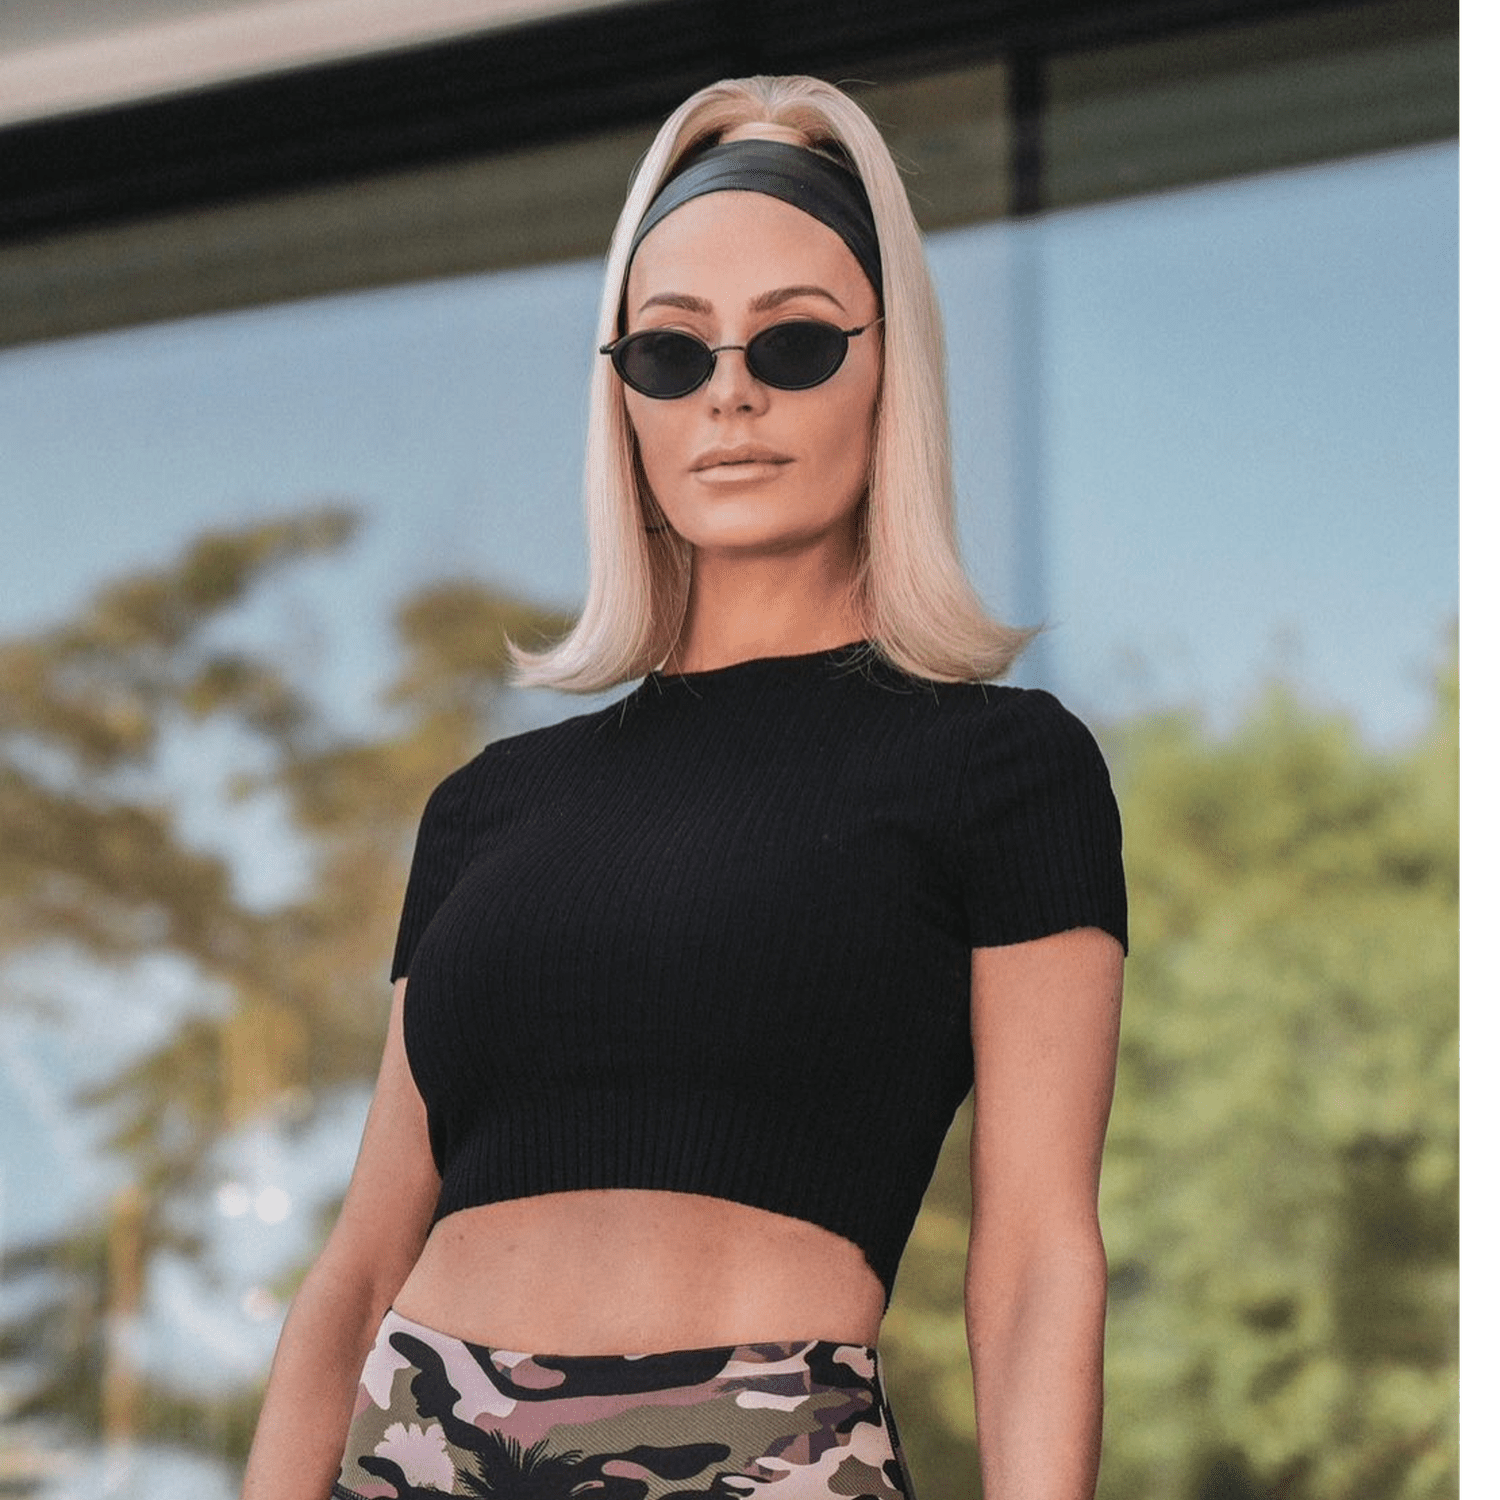 Dorit Kemsley wears a high ponytail hairstyle with flipped ends, headband, and oval sunglasses